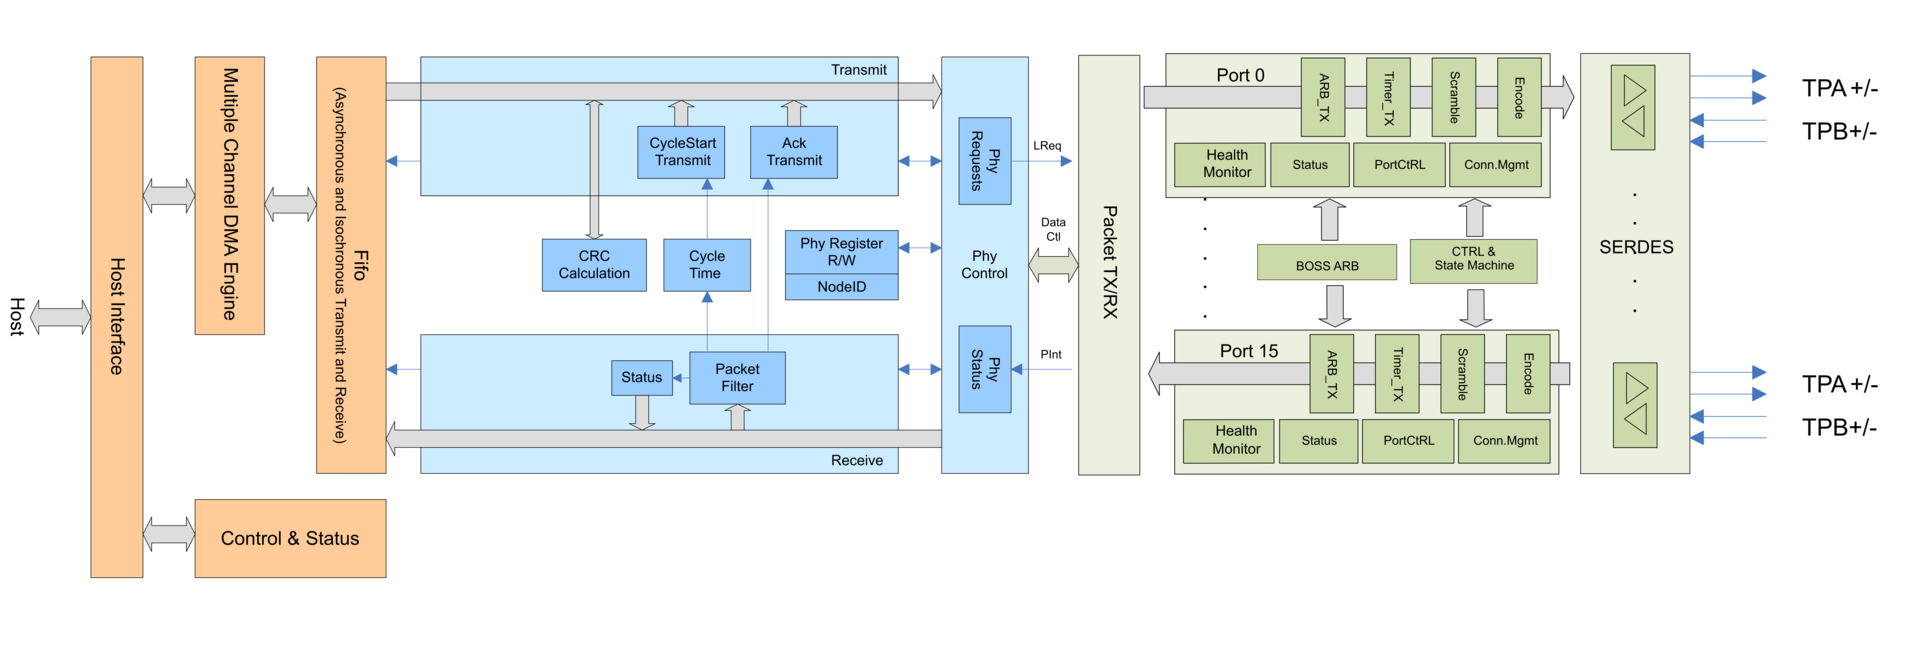 1394 and AS5643 IP Core solutions - FireCore Extended Block Diagram